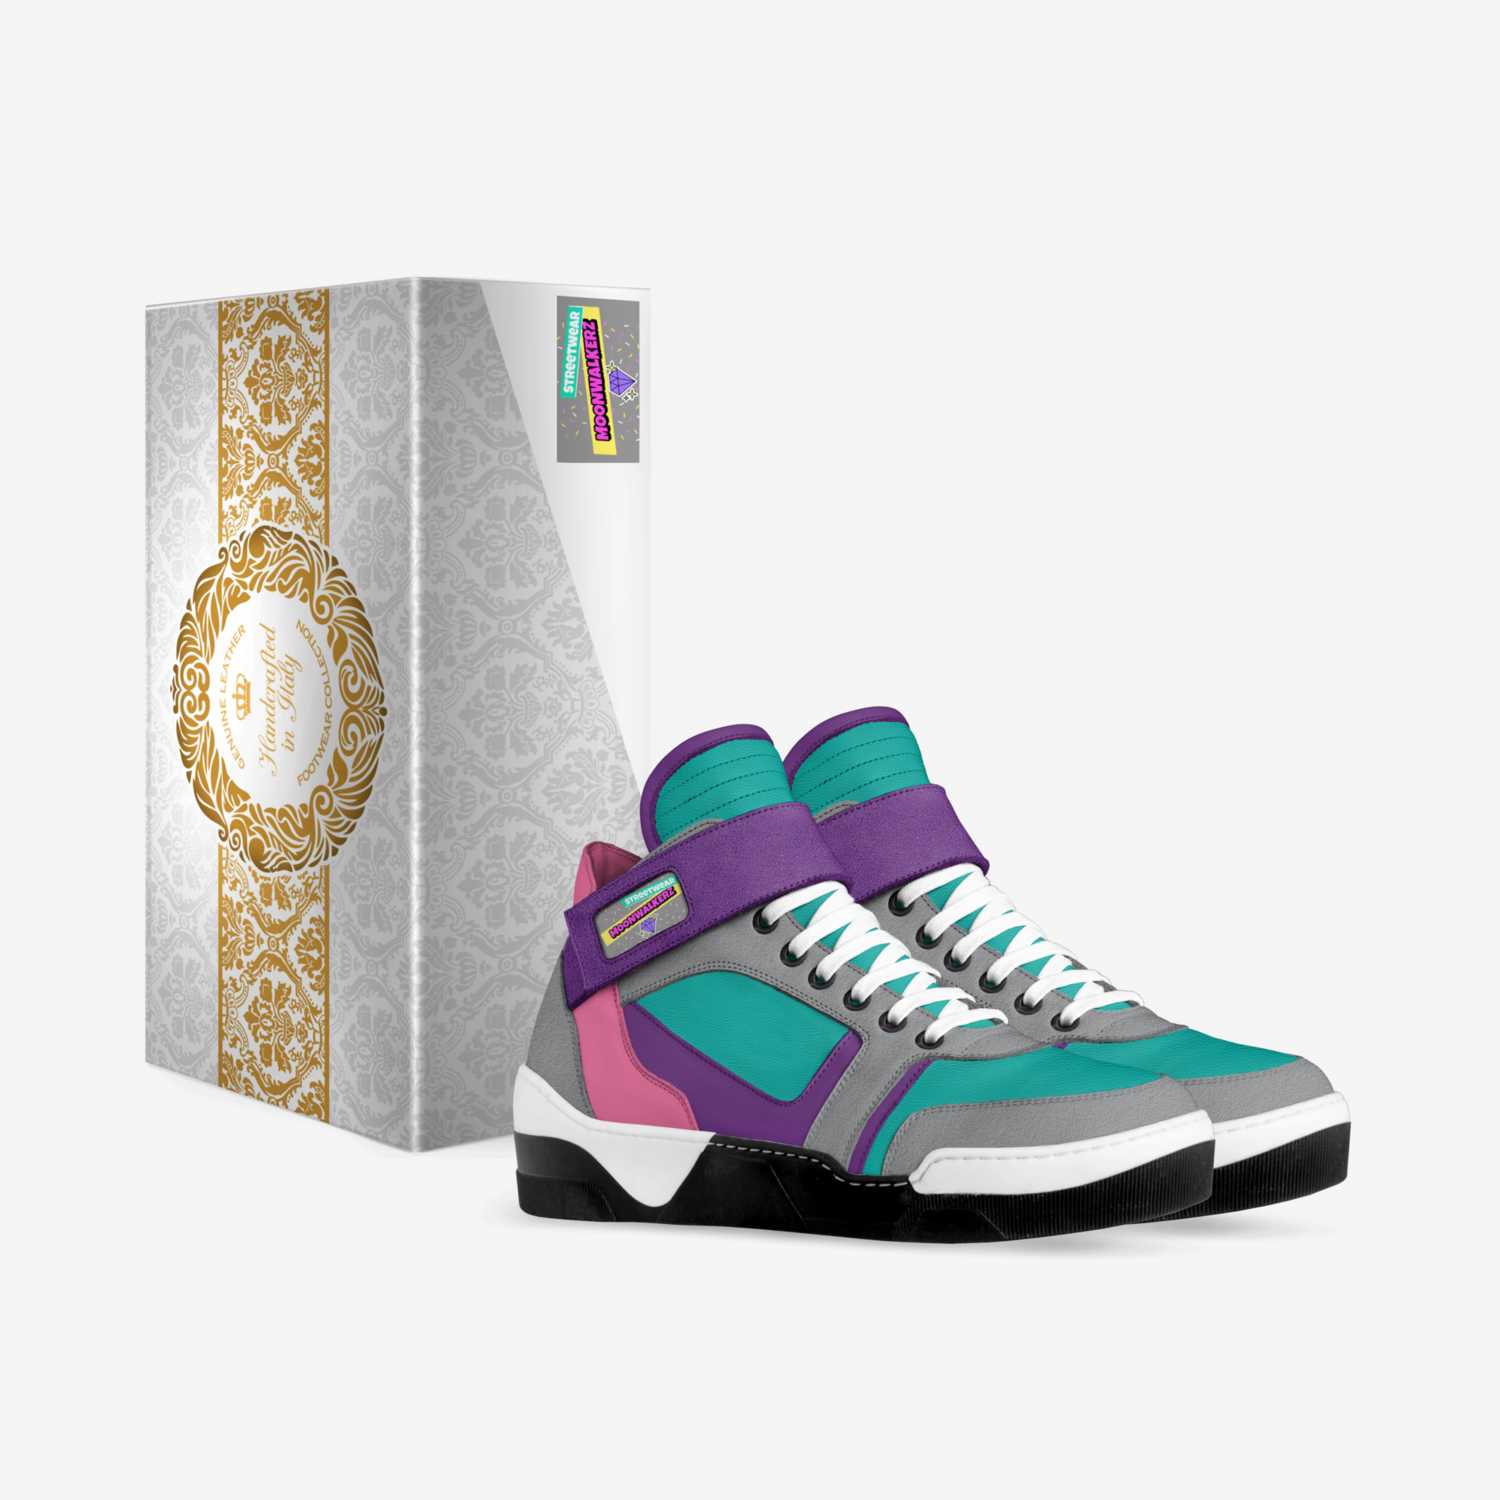 SL700 custom made in Italy shoes by Branden Hayes | Box view